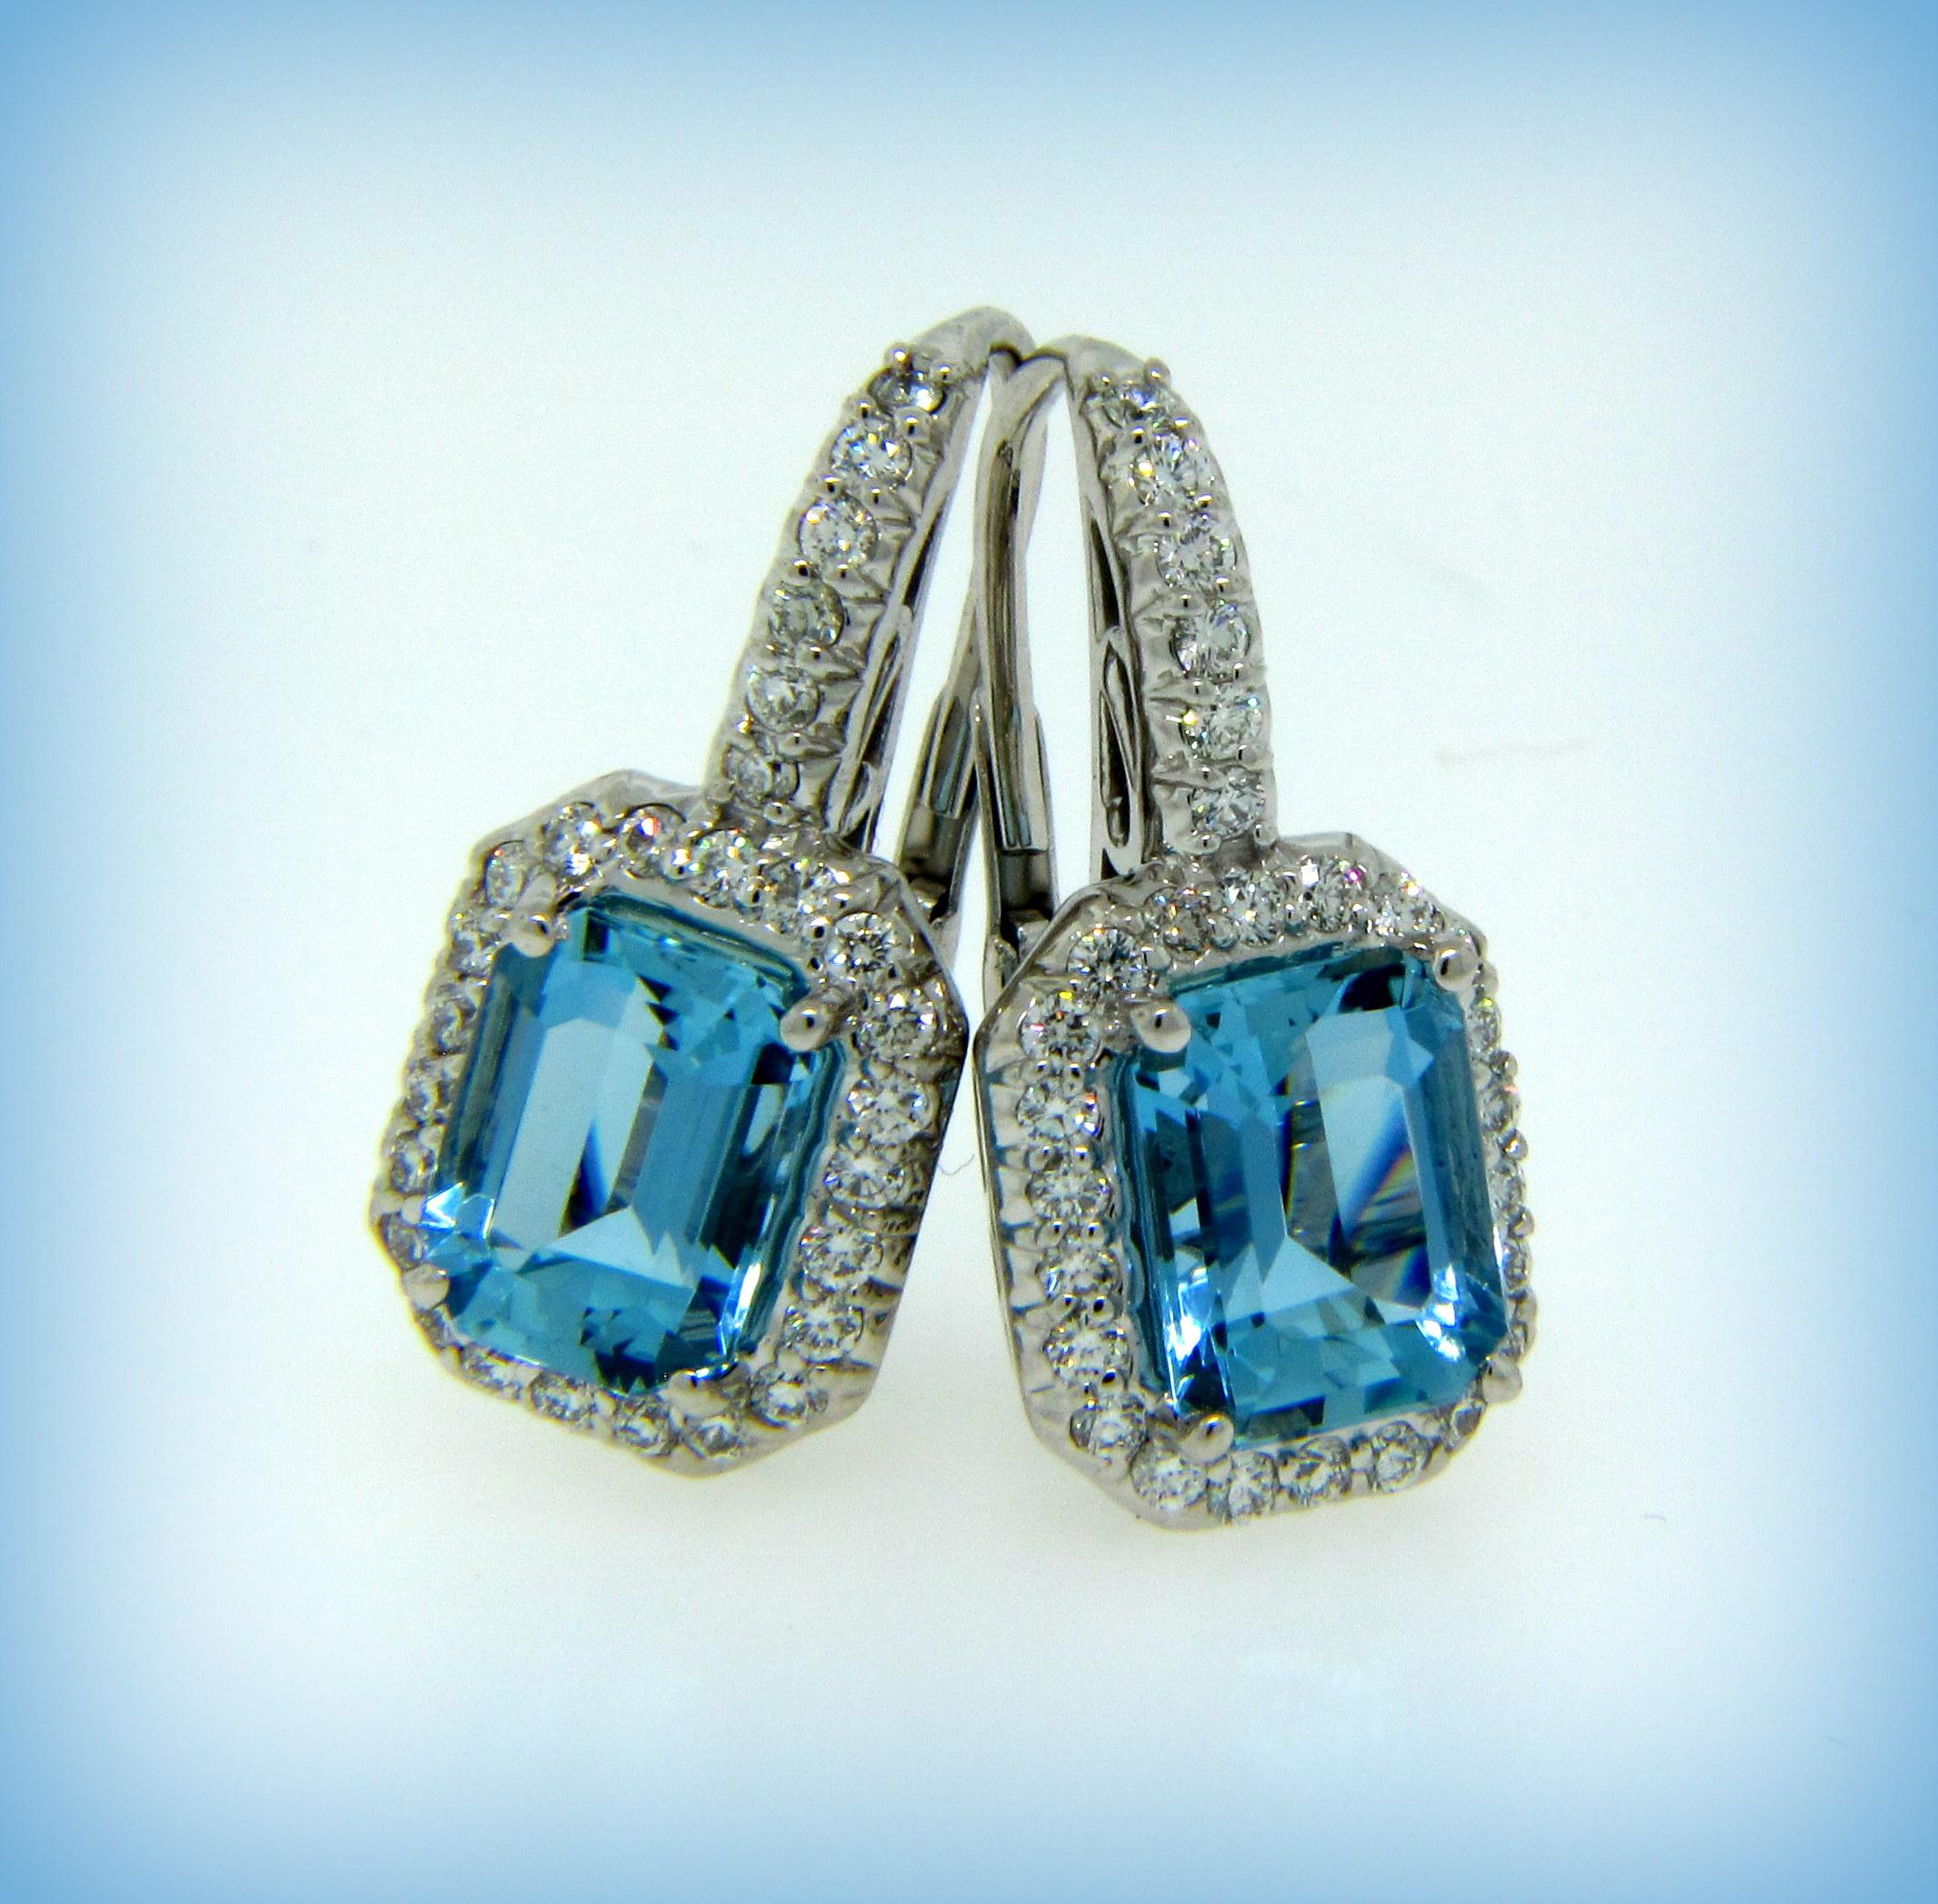 These Vintage Aquamarine Earrings are set in Diamond Studded White Gold.

These beutiful earrings consist of:

2 Aquamarines of excellent quality weighing a total of 4.13 cts. 

These Aquamarines are set with 56 Round Brilliant Diamonds weighing a